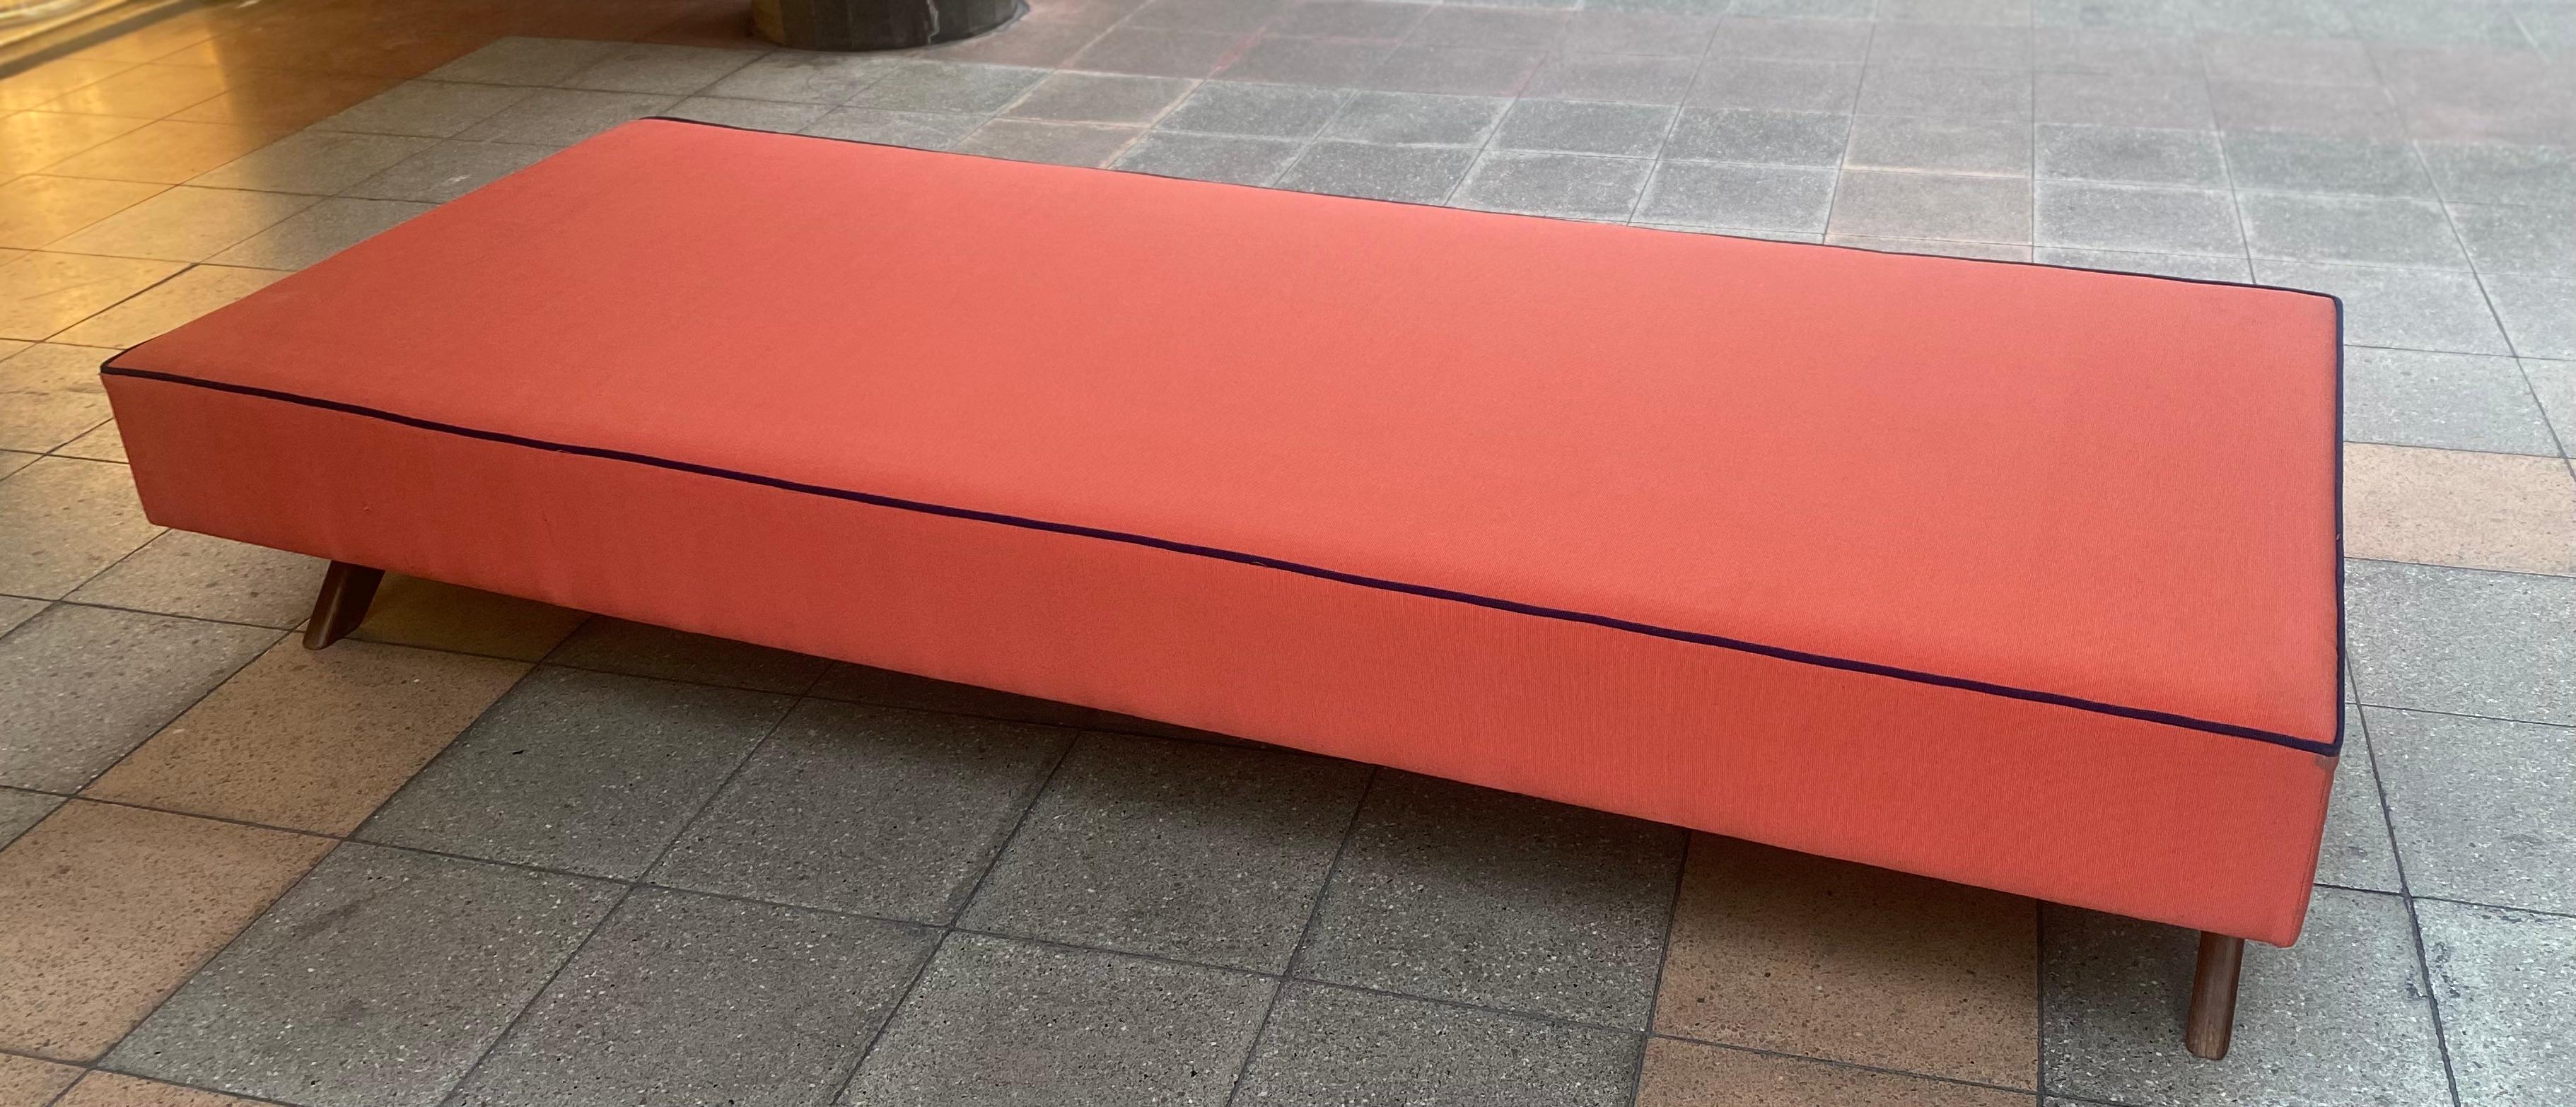 Daybed by Jeanneret 
daybed in solid teak and cotton canvas. 
Rectangular base upholstered in coral red cotton canvas with blue piping. 
circa 1957-58.
Dimensions: 
Height: 37 cm.
Length : 197 cm.
Width: 79 cm (+/-).
Origin France 
attribution mark